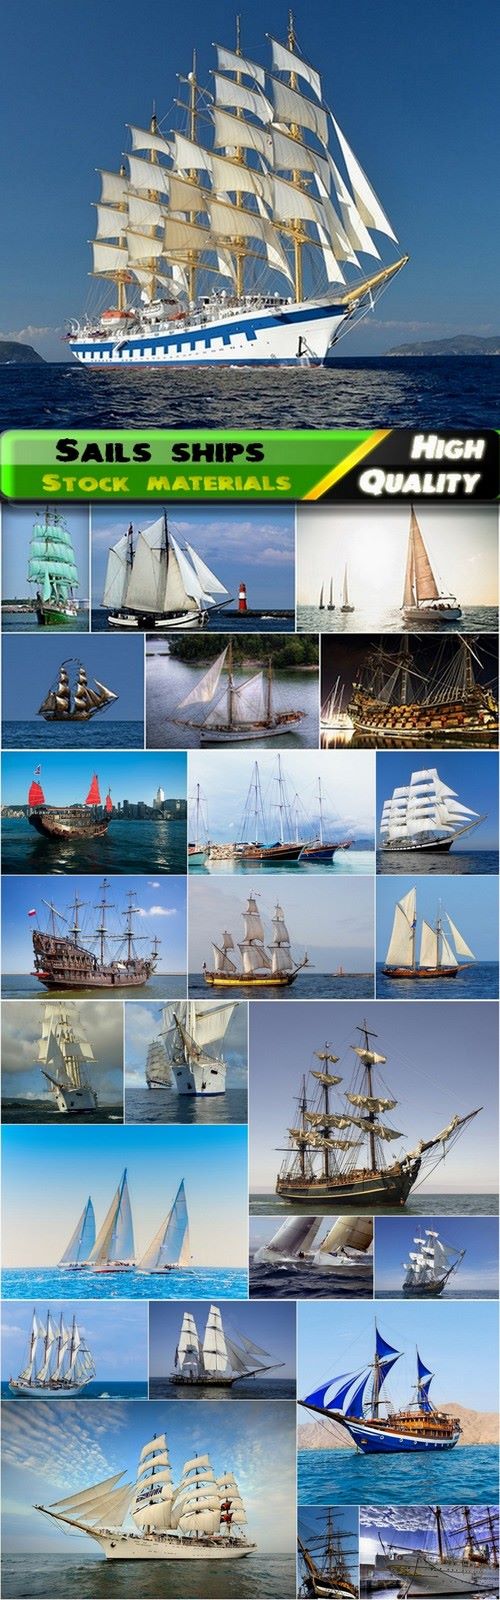 Sails ships and yacht Stock images - 25 HQ Jpg